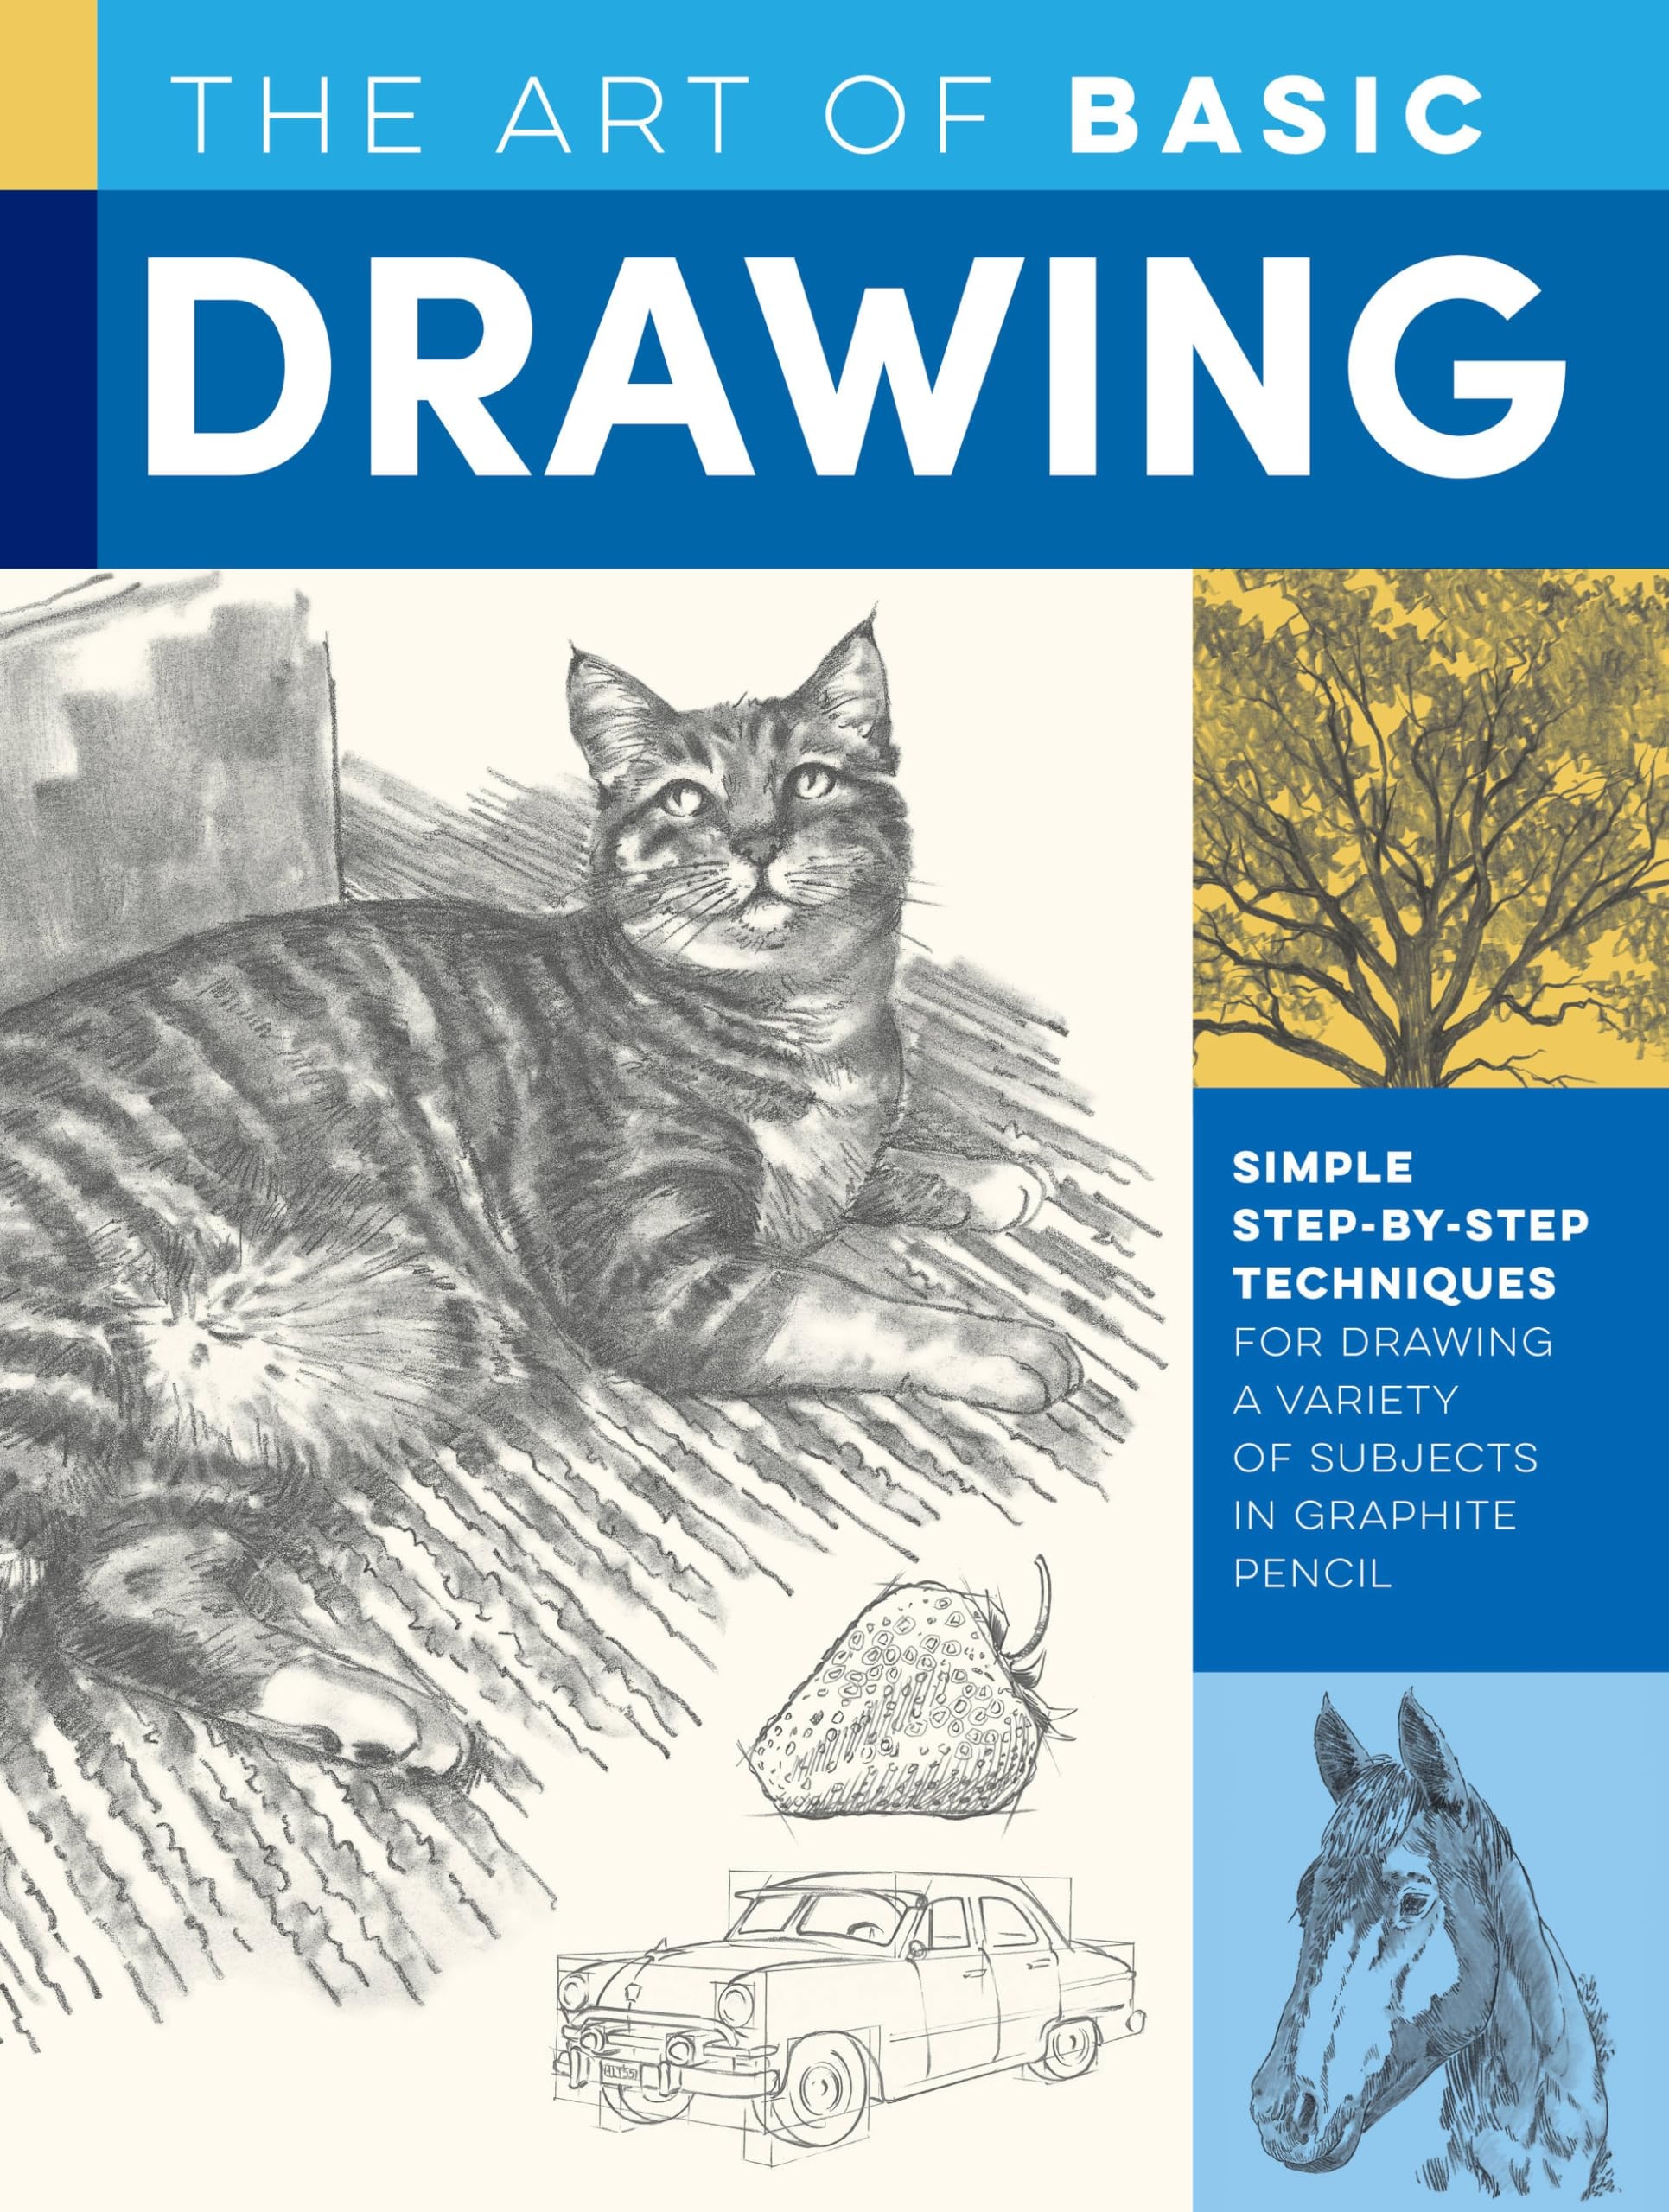 The Art of Basic Drawing: Simple step-by-step techniques for drawing a variety of subjects in graphite pencil (Collector's Series): 1